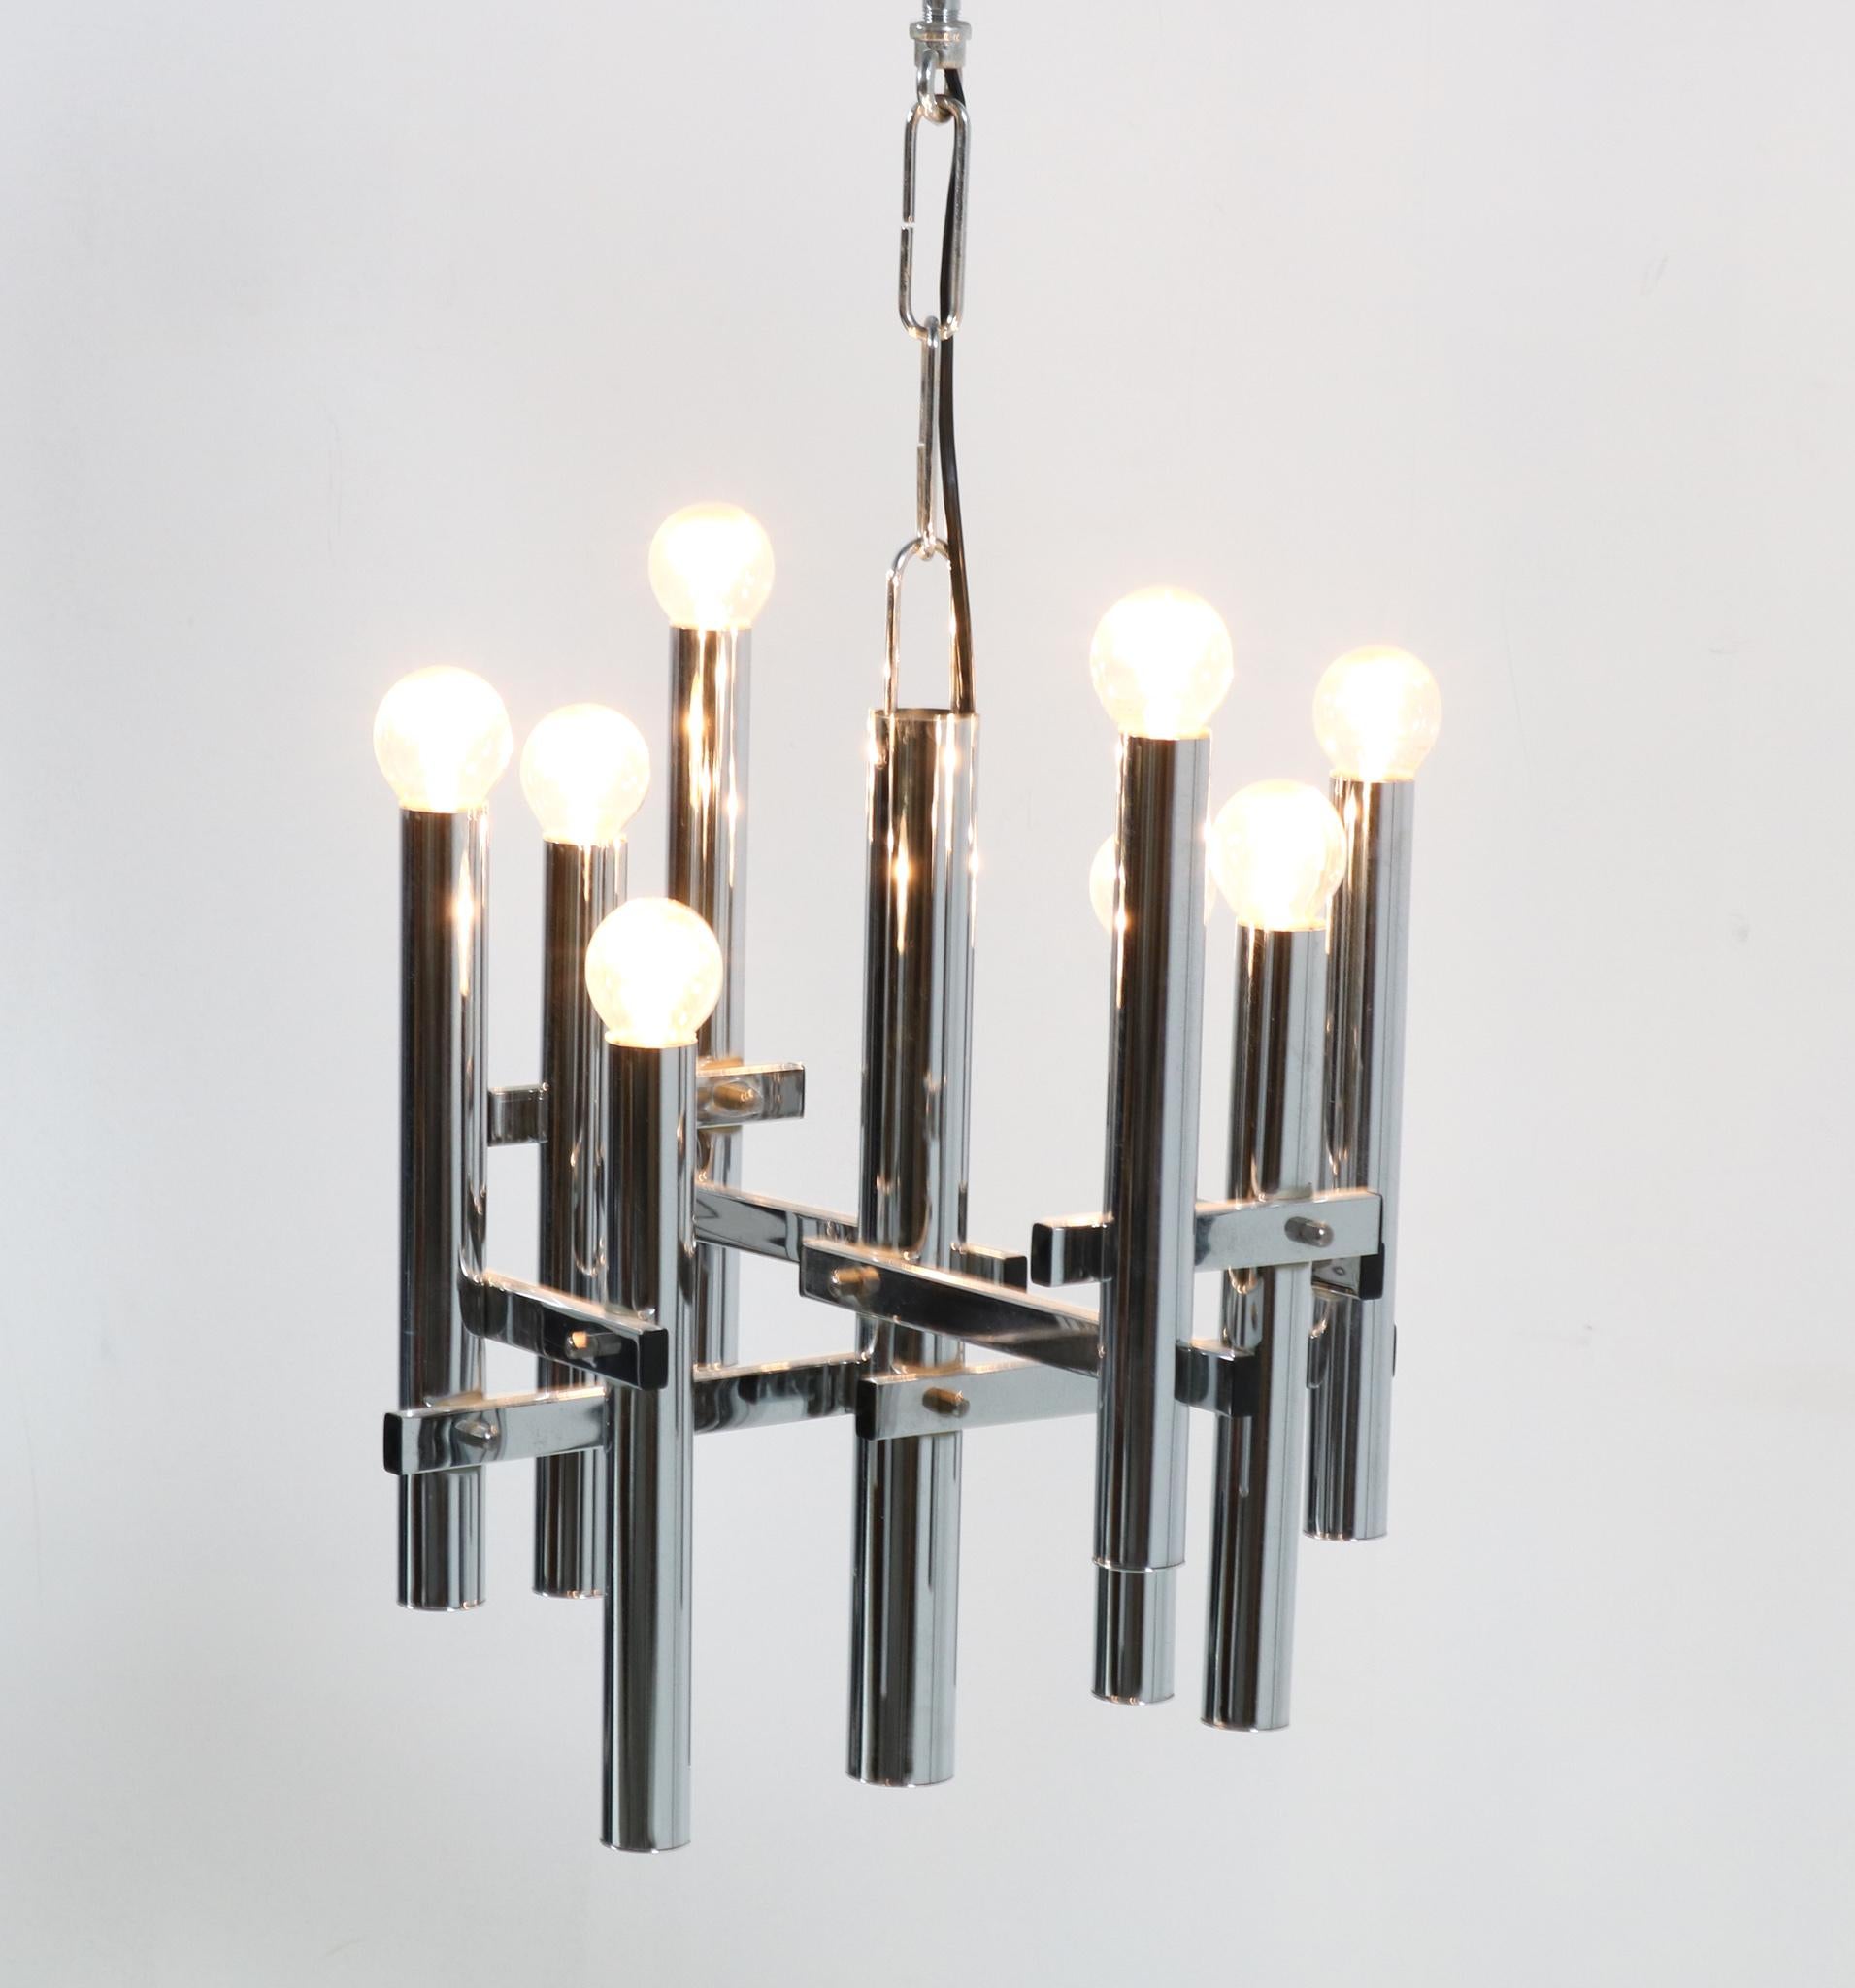 Stunning Mid-Century Modern Chandelier.
In the style of Gaetano Sciolari.
Striking Italian design from the 1970s.
Chrome base with eight original sockets for E-24 lightbulbs.
In good original condition with a beautiful patina.